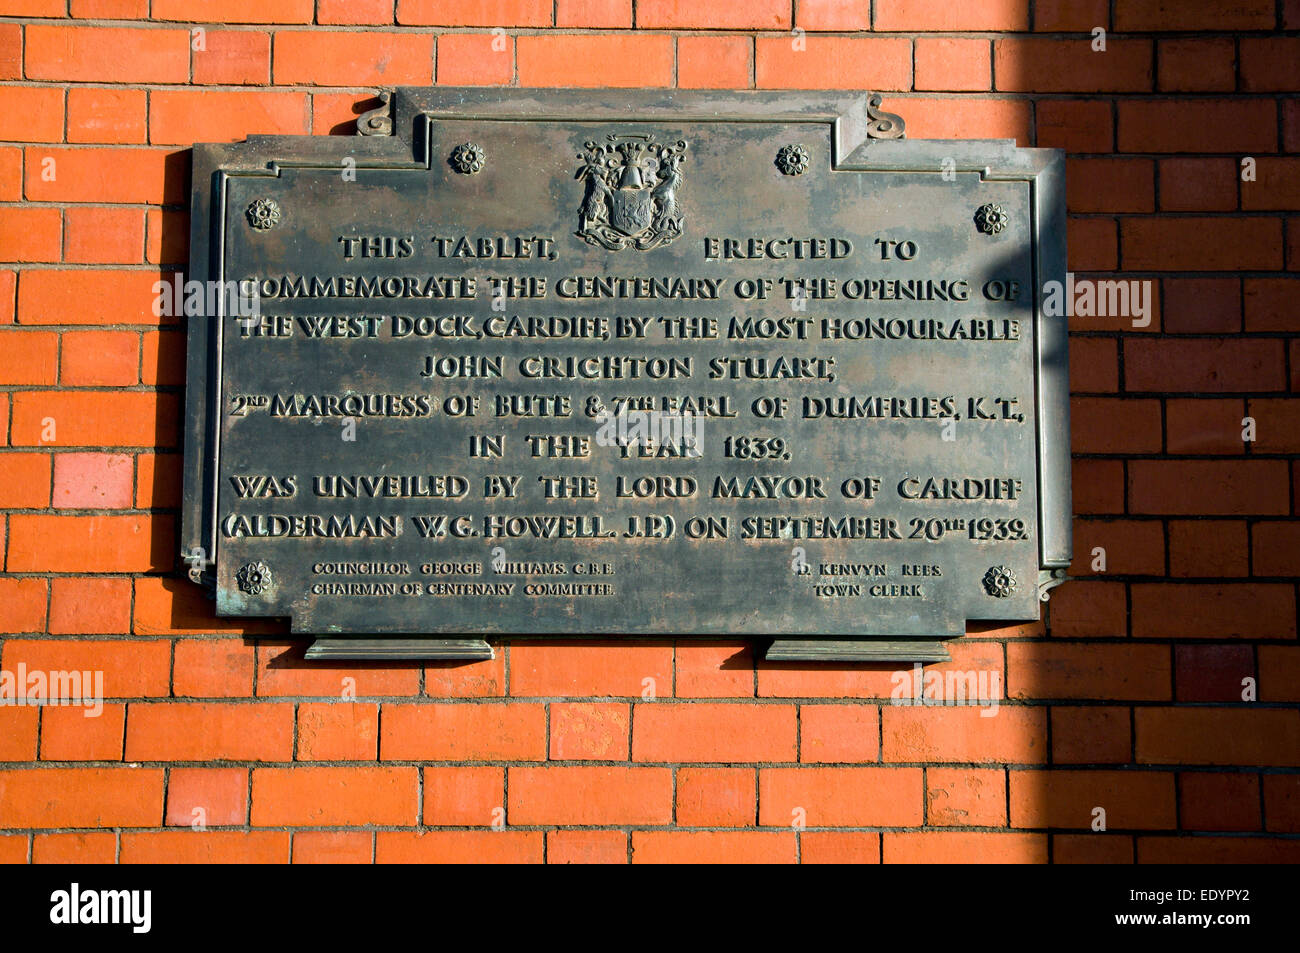 Tablet to commemorate the centenary of the opening of the West Dock Cardiff, Pierhead Building, Cardiff Bay, Wales. Stock Photo